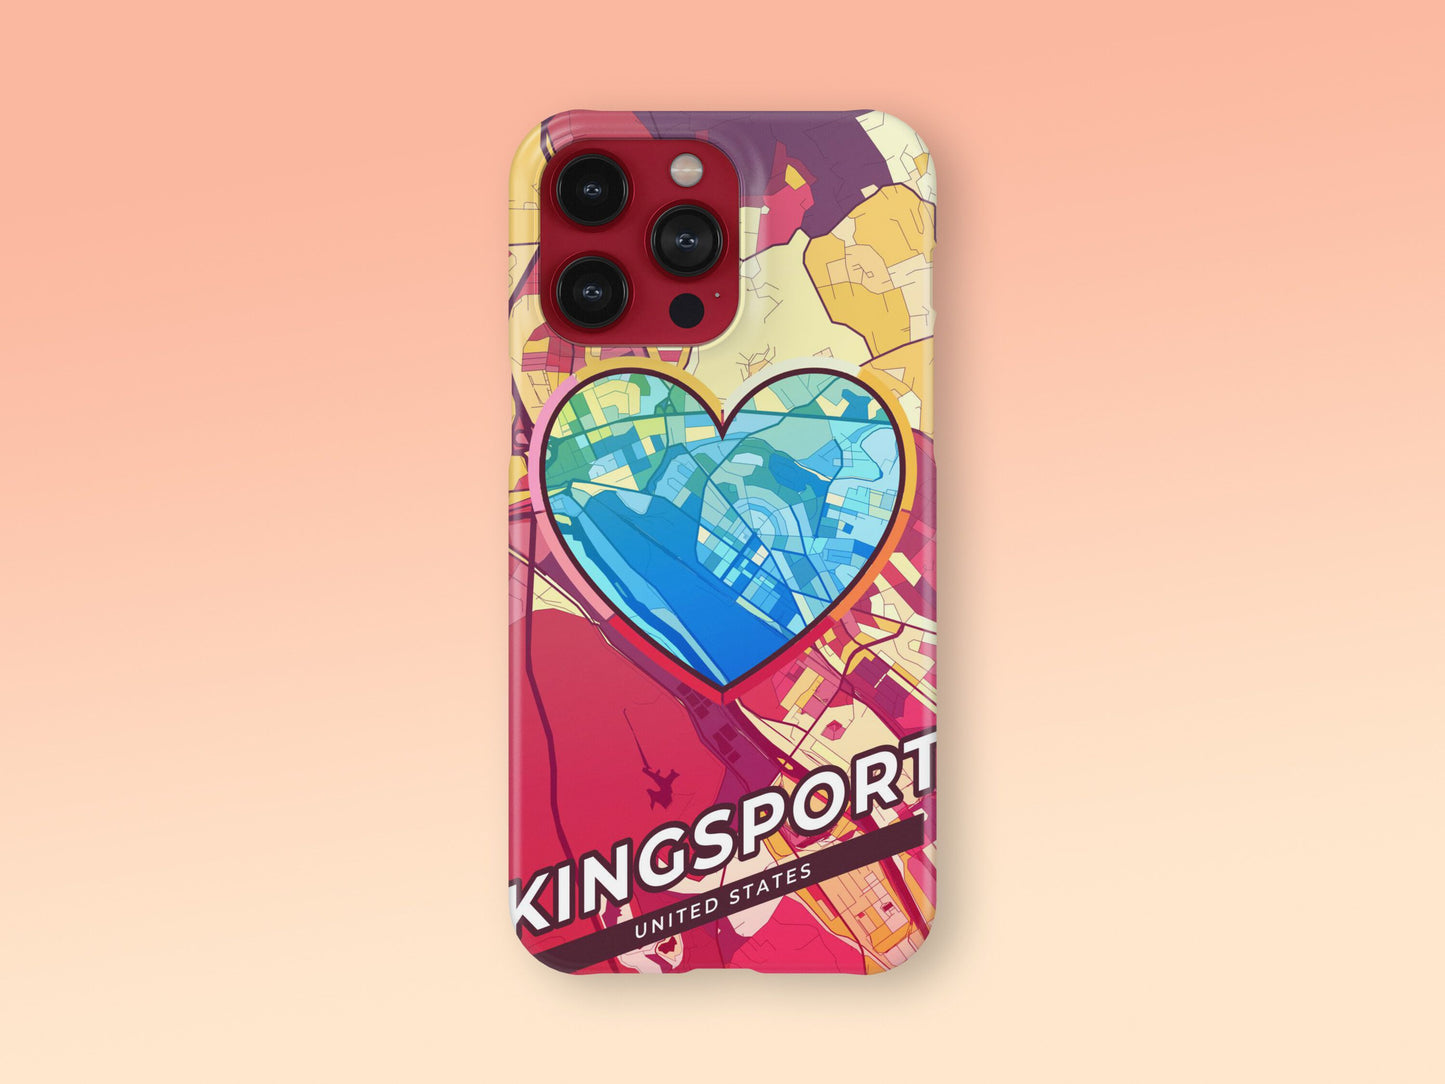 Kingsport Tennessee slim phone case with colorful icon. Birthday, wedding or housewarming gift. Couple match cases. 2